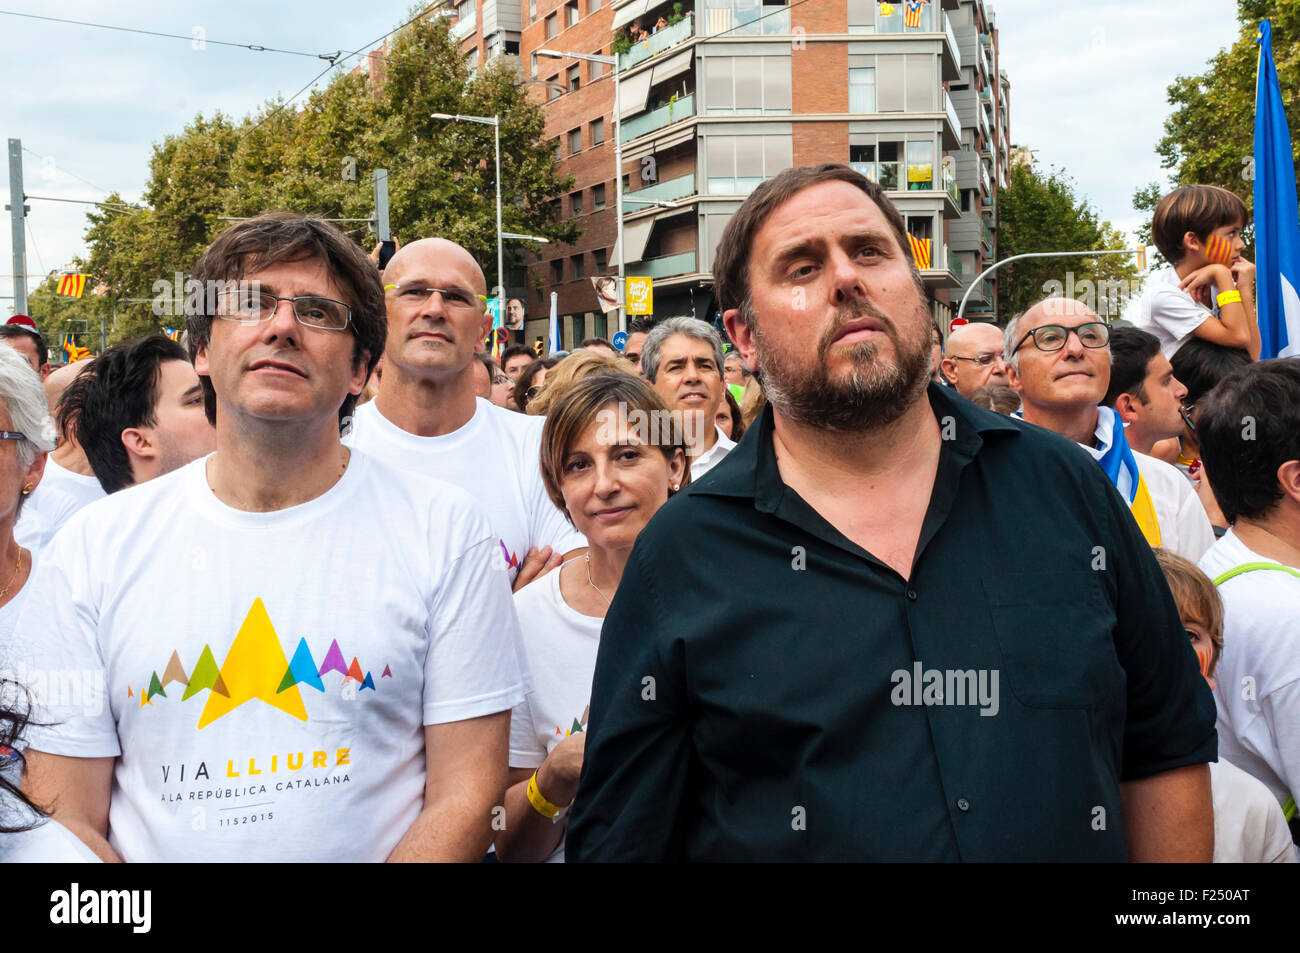 Barcelona , Catalonia, Spain . 11th Sep, 2015. The candidates Junts pel Yes , Oriol Junqueras , Raul Romeva and Carme Forcadell, during the Via Lliure to the Catalan Republic , independence mobilization organized by the Catalan National Assemblea and Omnium Cultural in the national day catalonia. The independence demonstration convened hundreds of thousands of people in Barcelona Avenida Meridiana Credit:  Cisco Pelay / Alamy Live News Stock Photo